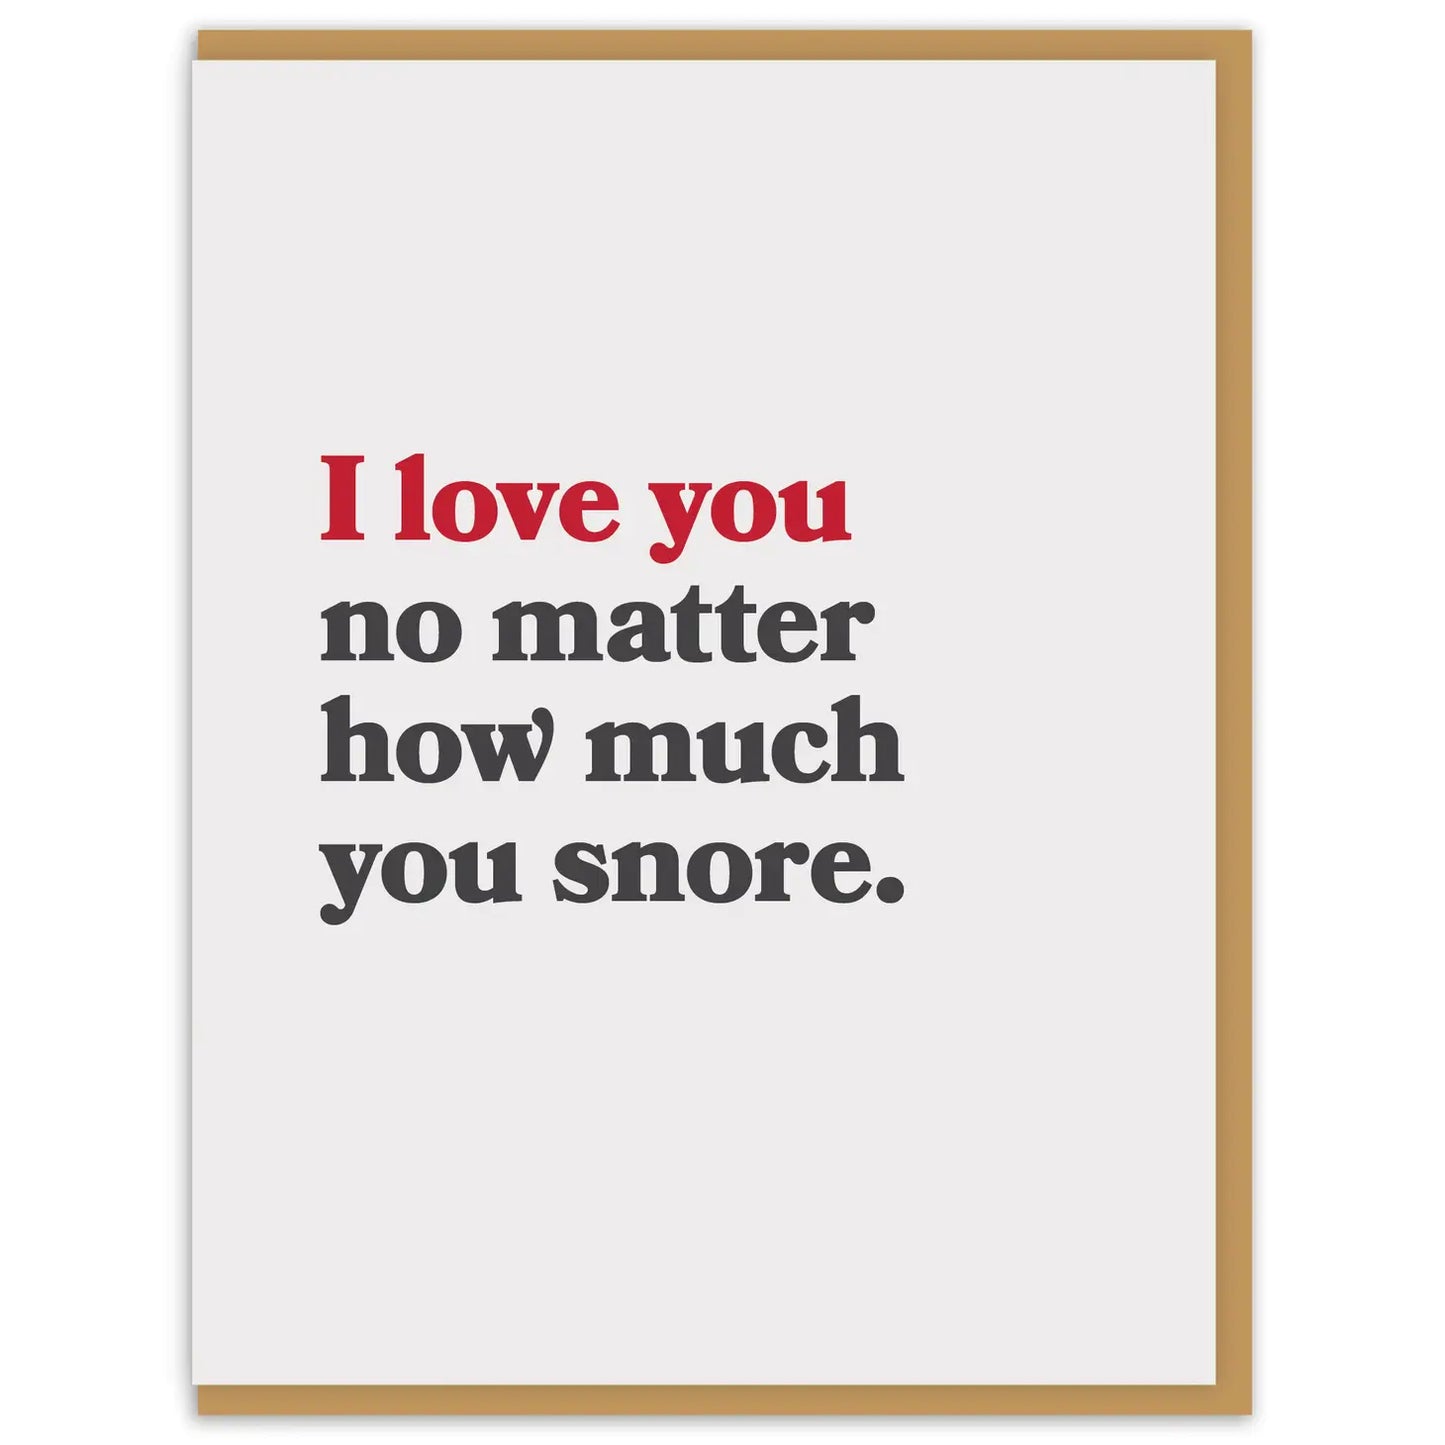 I Love You No Matter How Much You Snore Card